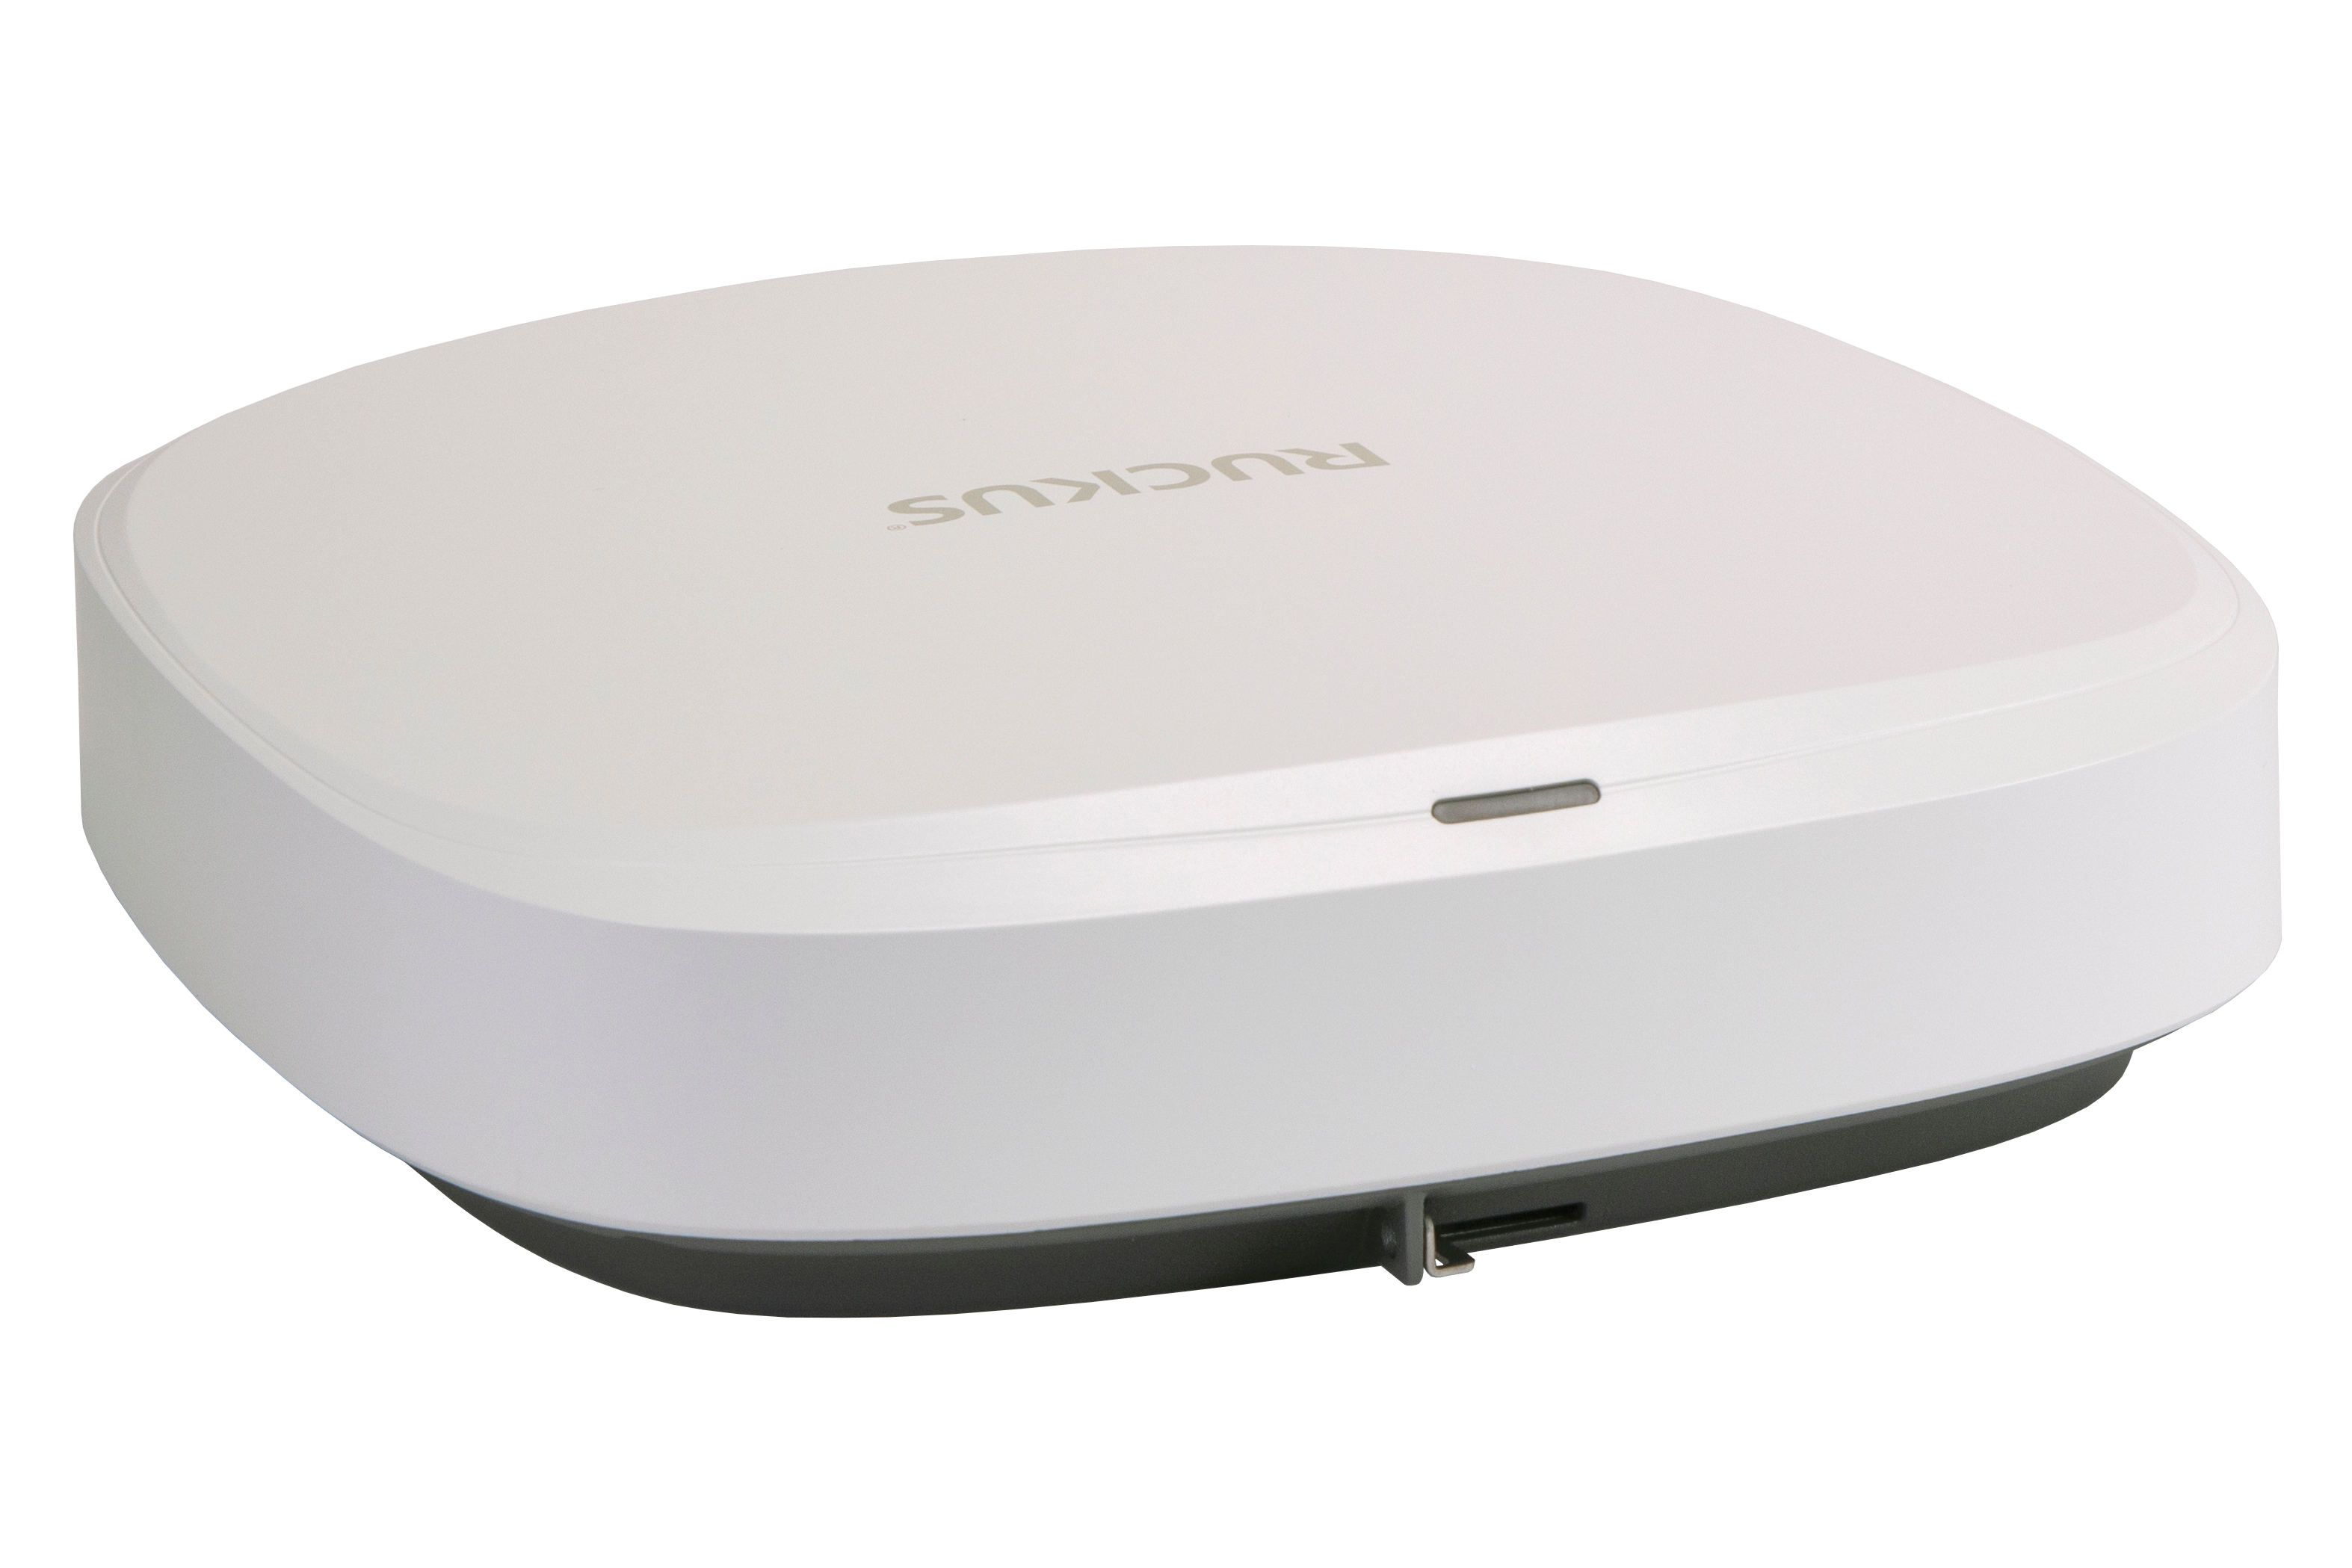 RUCKUS Wi-Fi 7 Access Point available and eligible for E-Rate